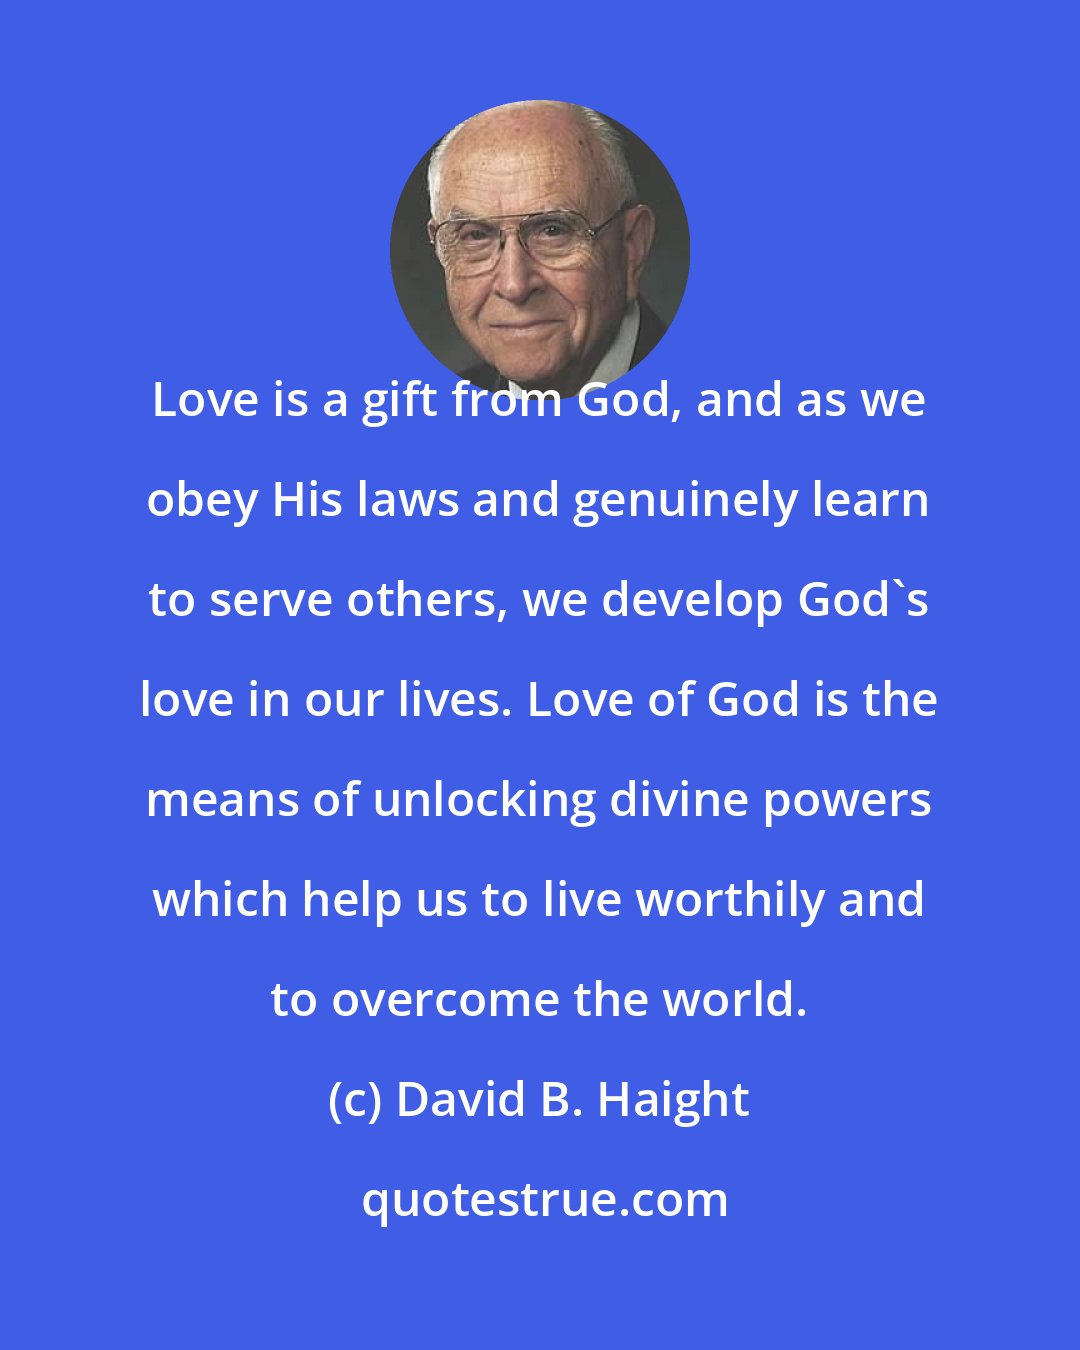 David B. Haight: Love is a gift from God, and as we obey His laws and genuinely learn to serve others, we develop God's love in our lives. Love of God is the means of unlocking divine powers which help us to live worthily and to overcome the world.